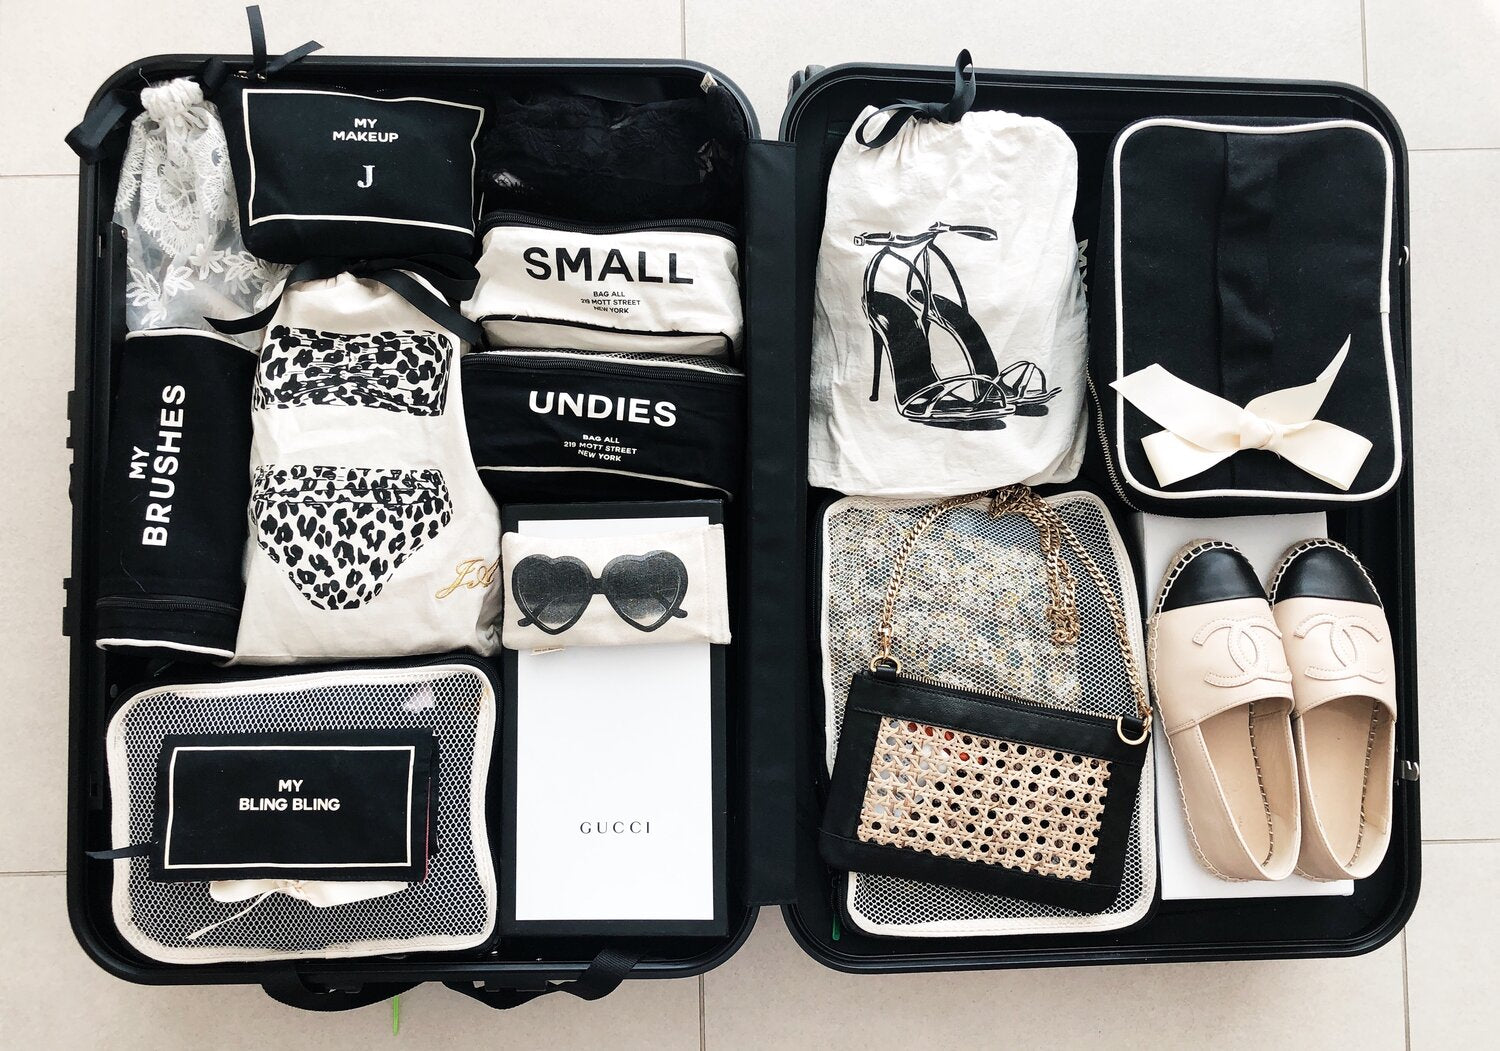 Pack Your Checked-in Bag Like a Pro